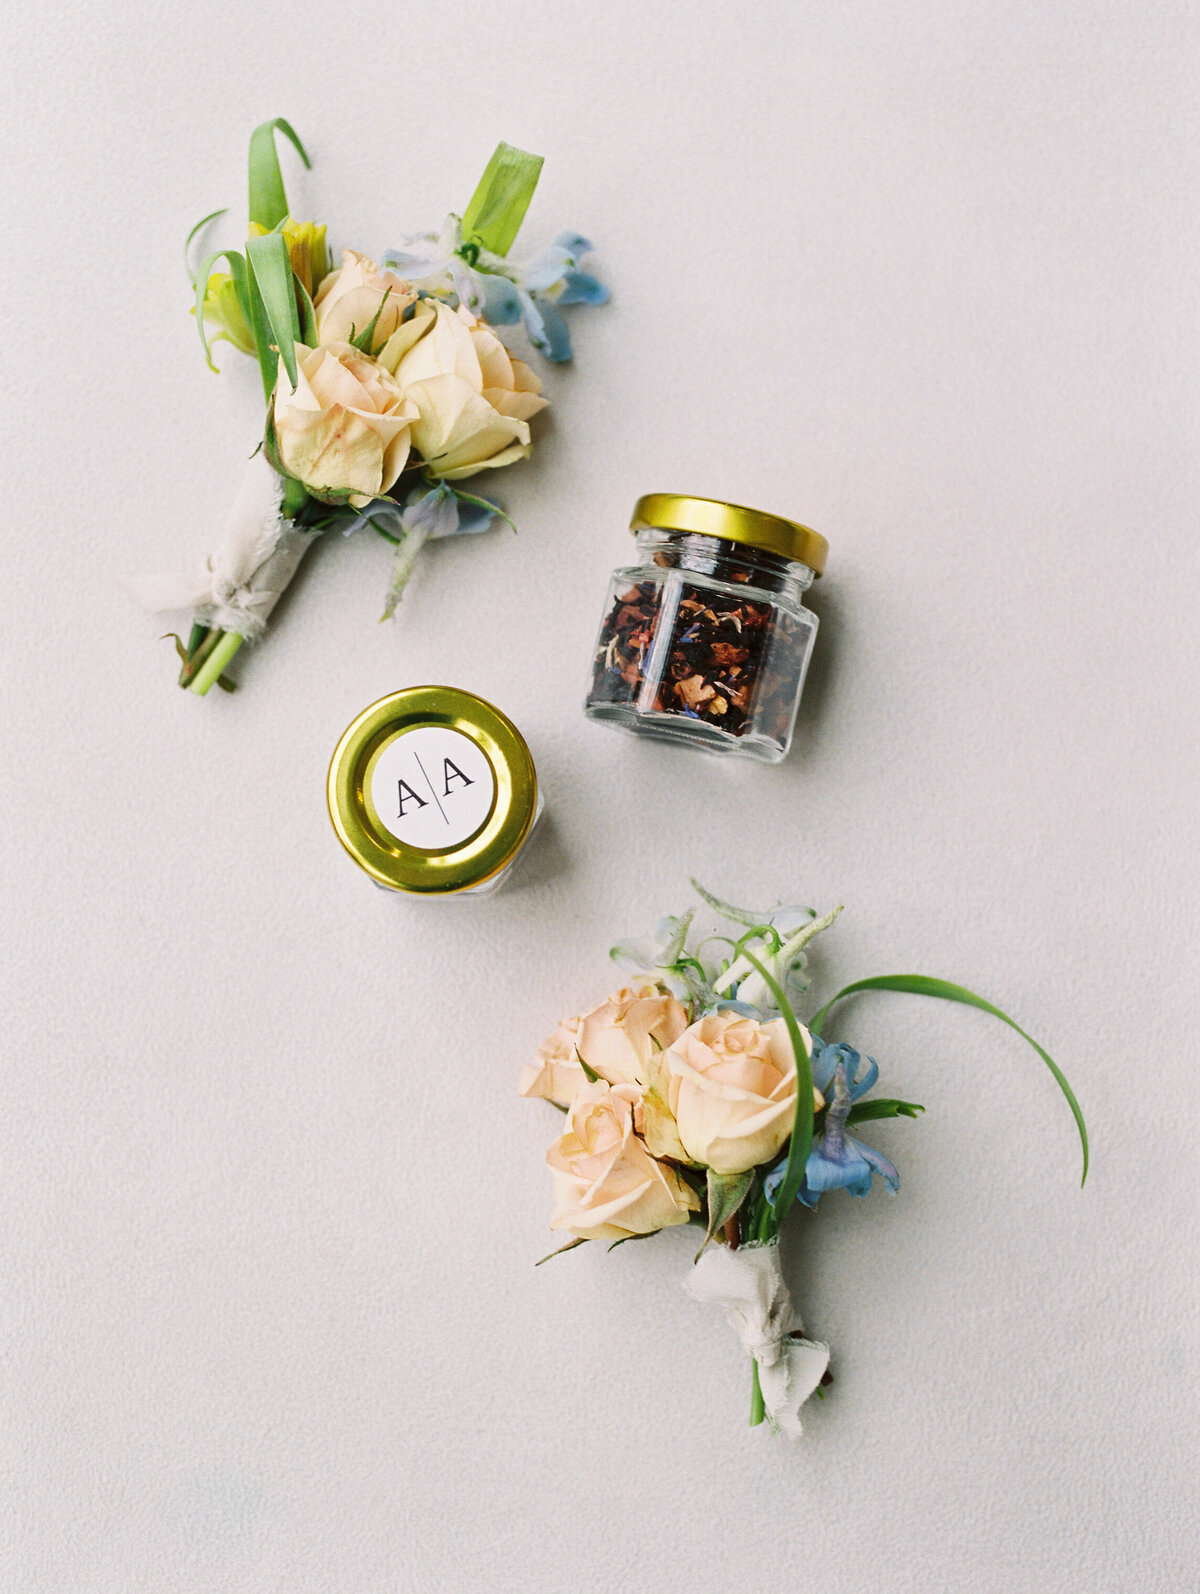 Two wedding boutonnieres on a flatlay with two wedding